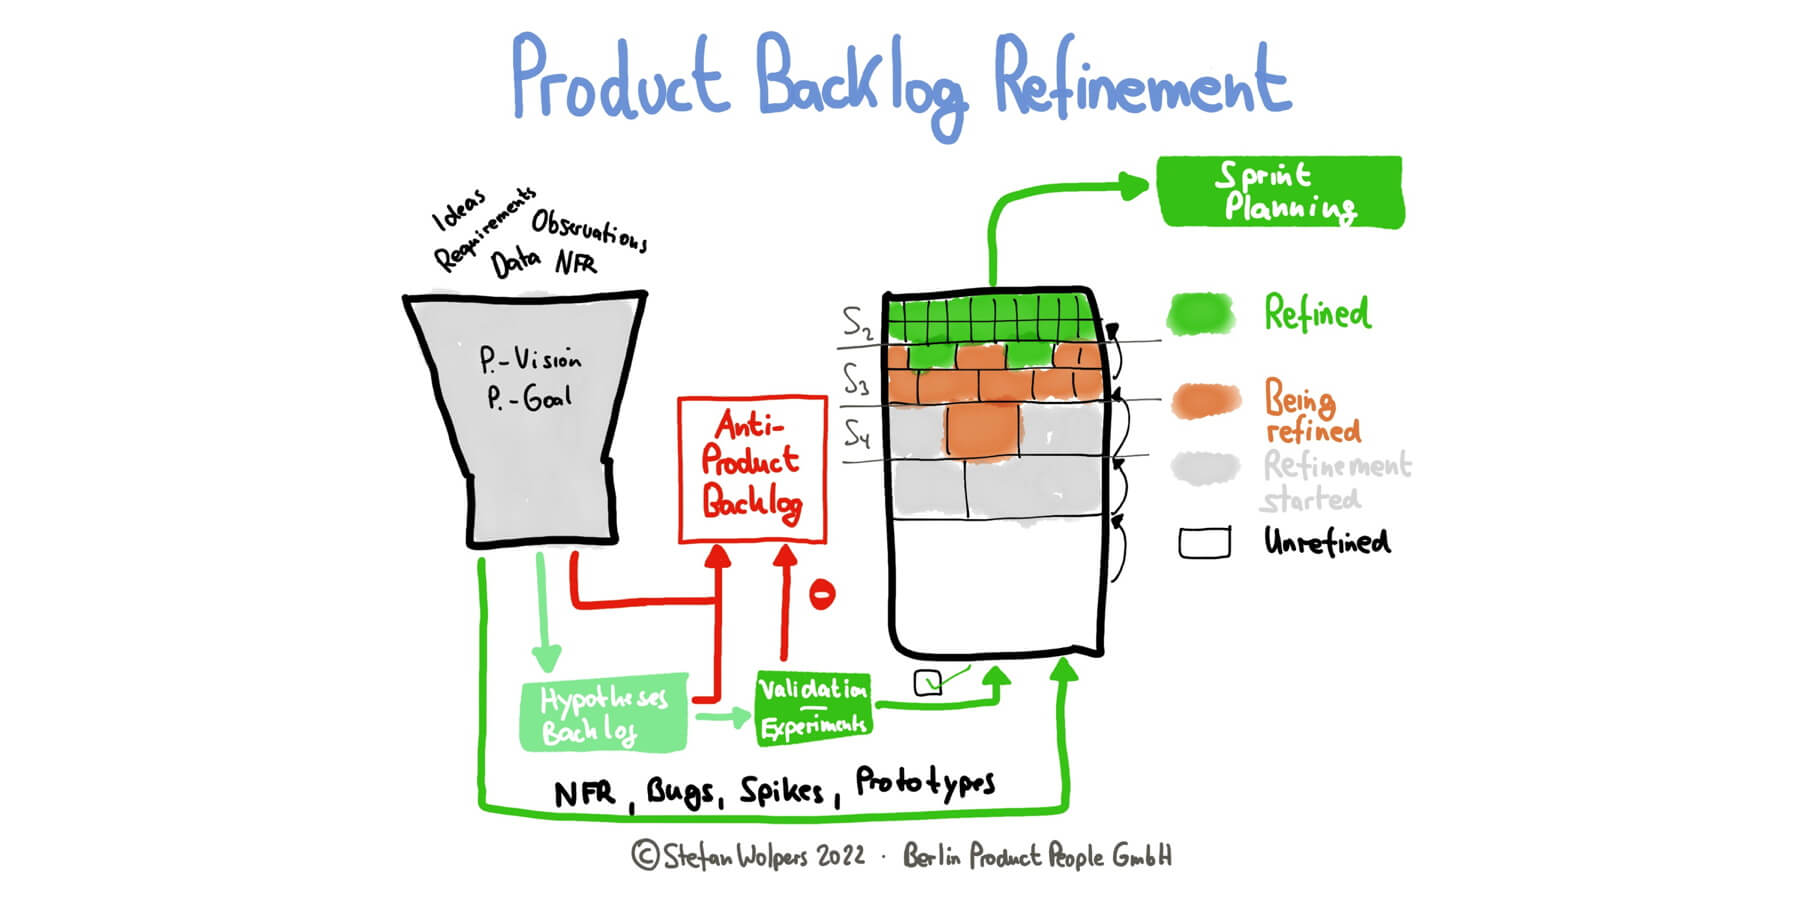 https://www.scrum.org/resources/blog/product-backlog-refinement-how-succeed-scrum-team